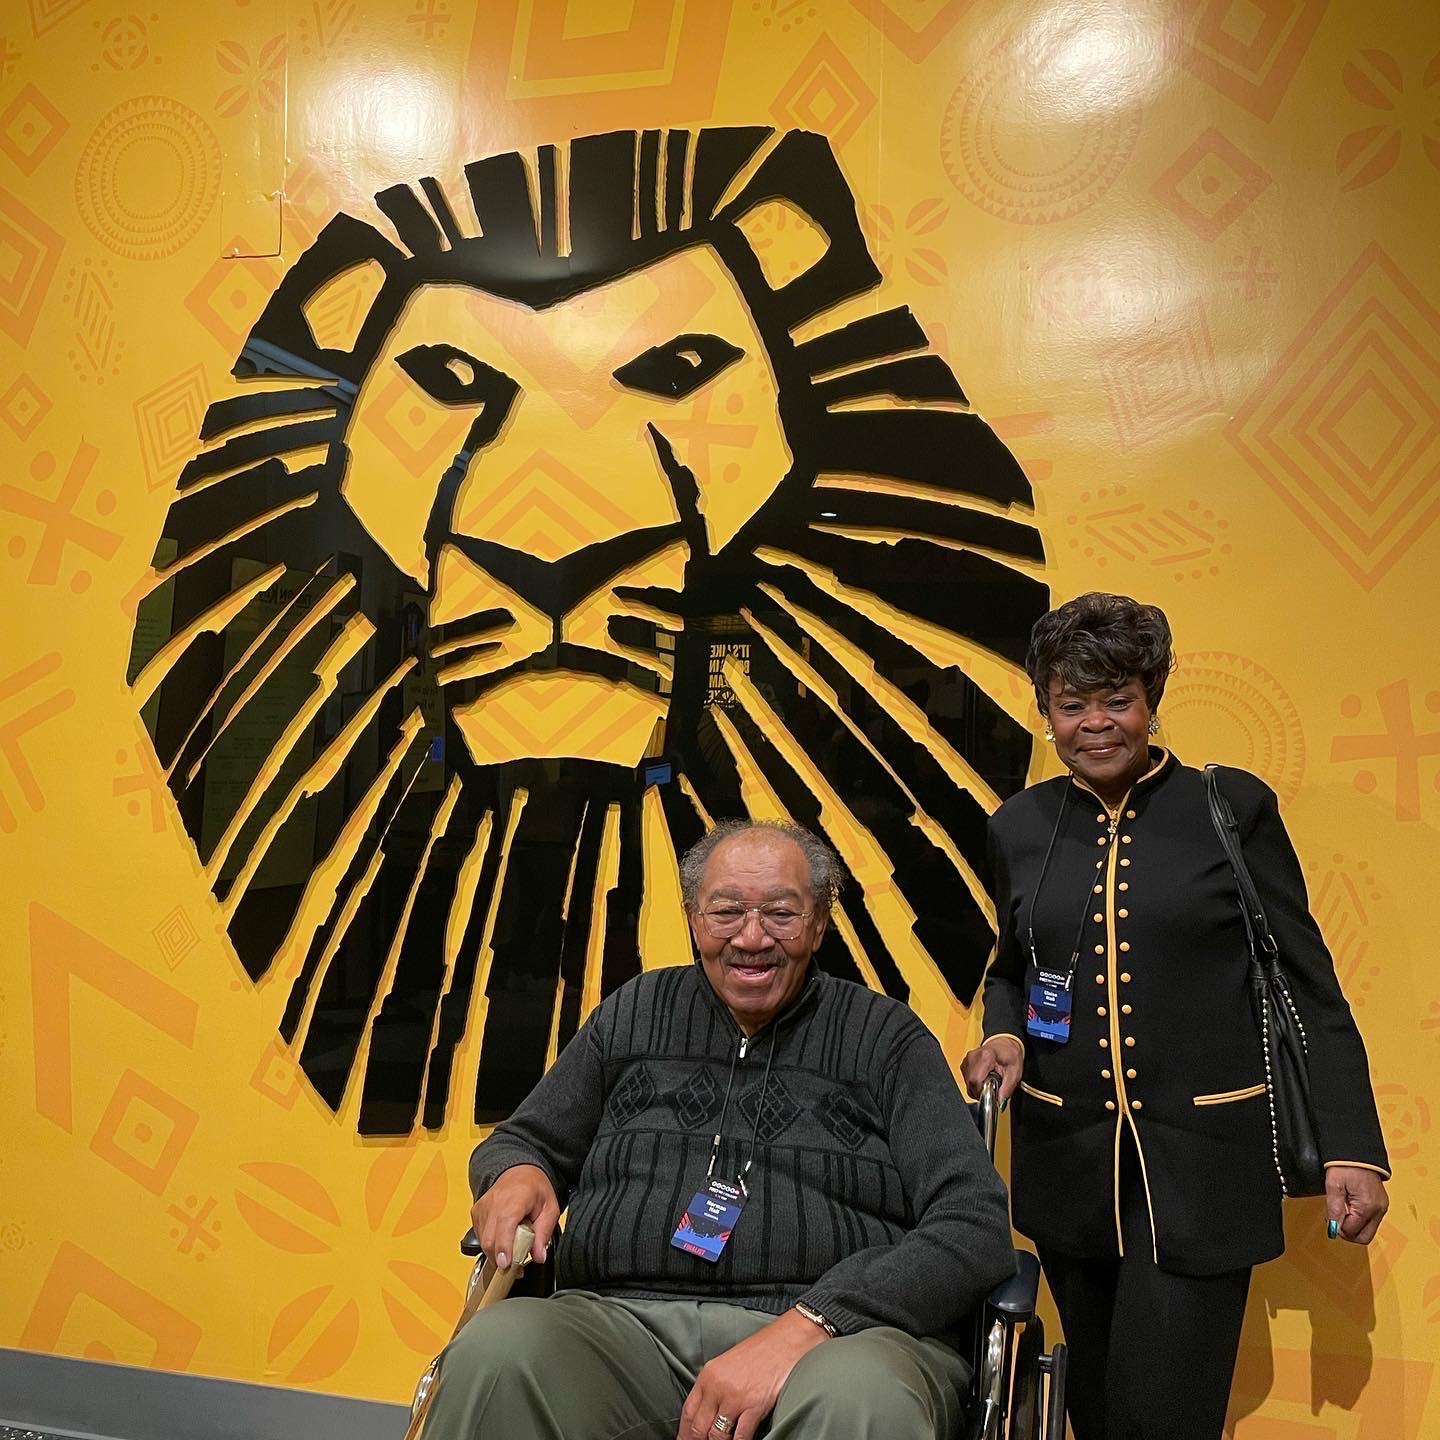 Norman and Eloise Hall in front of "The Lion King" sign.